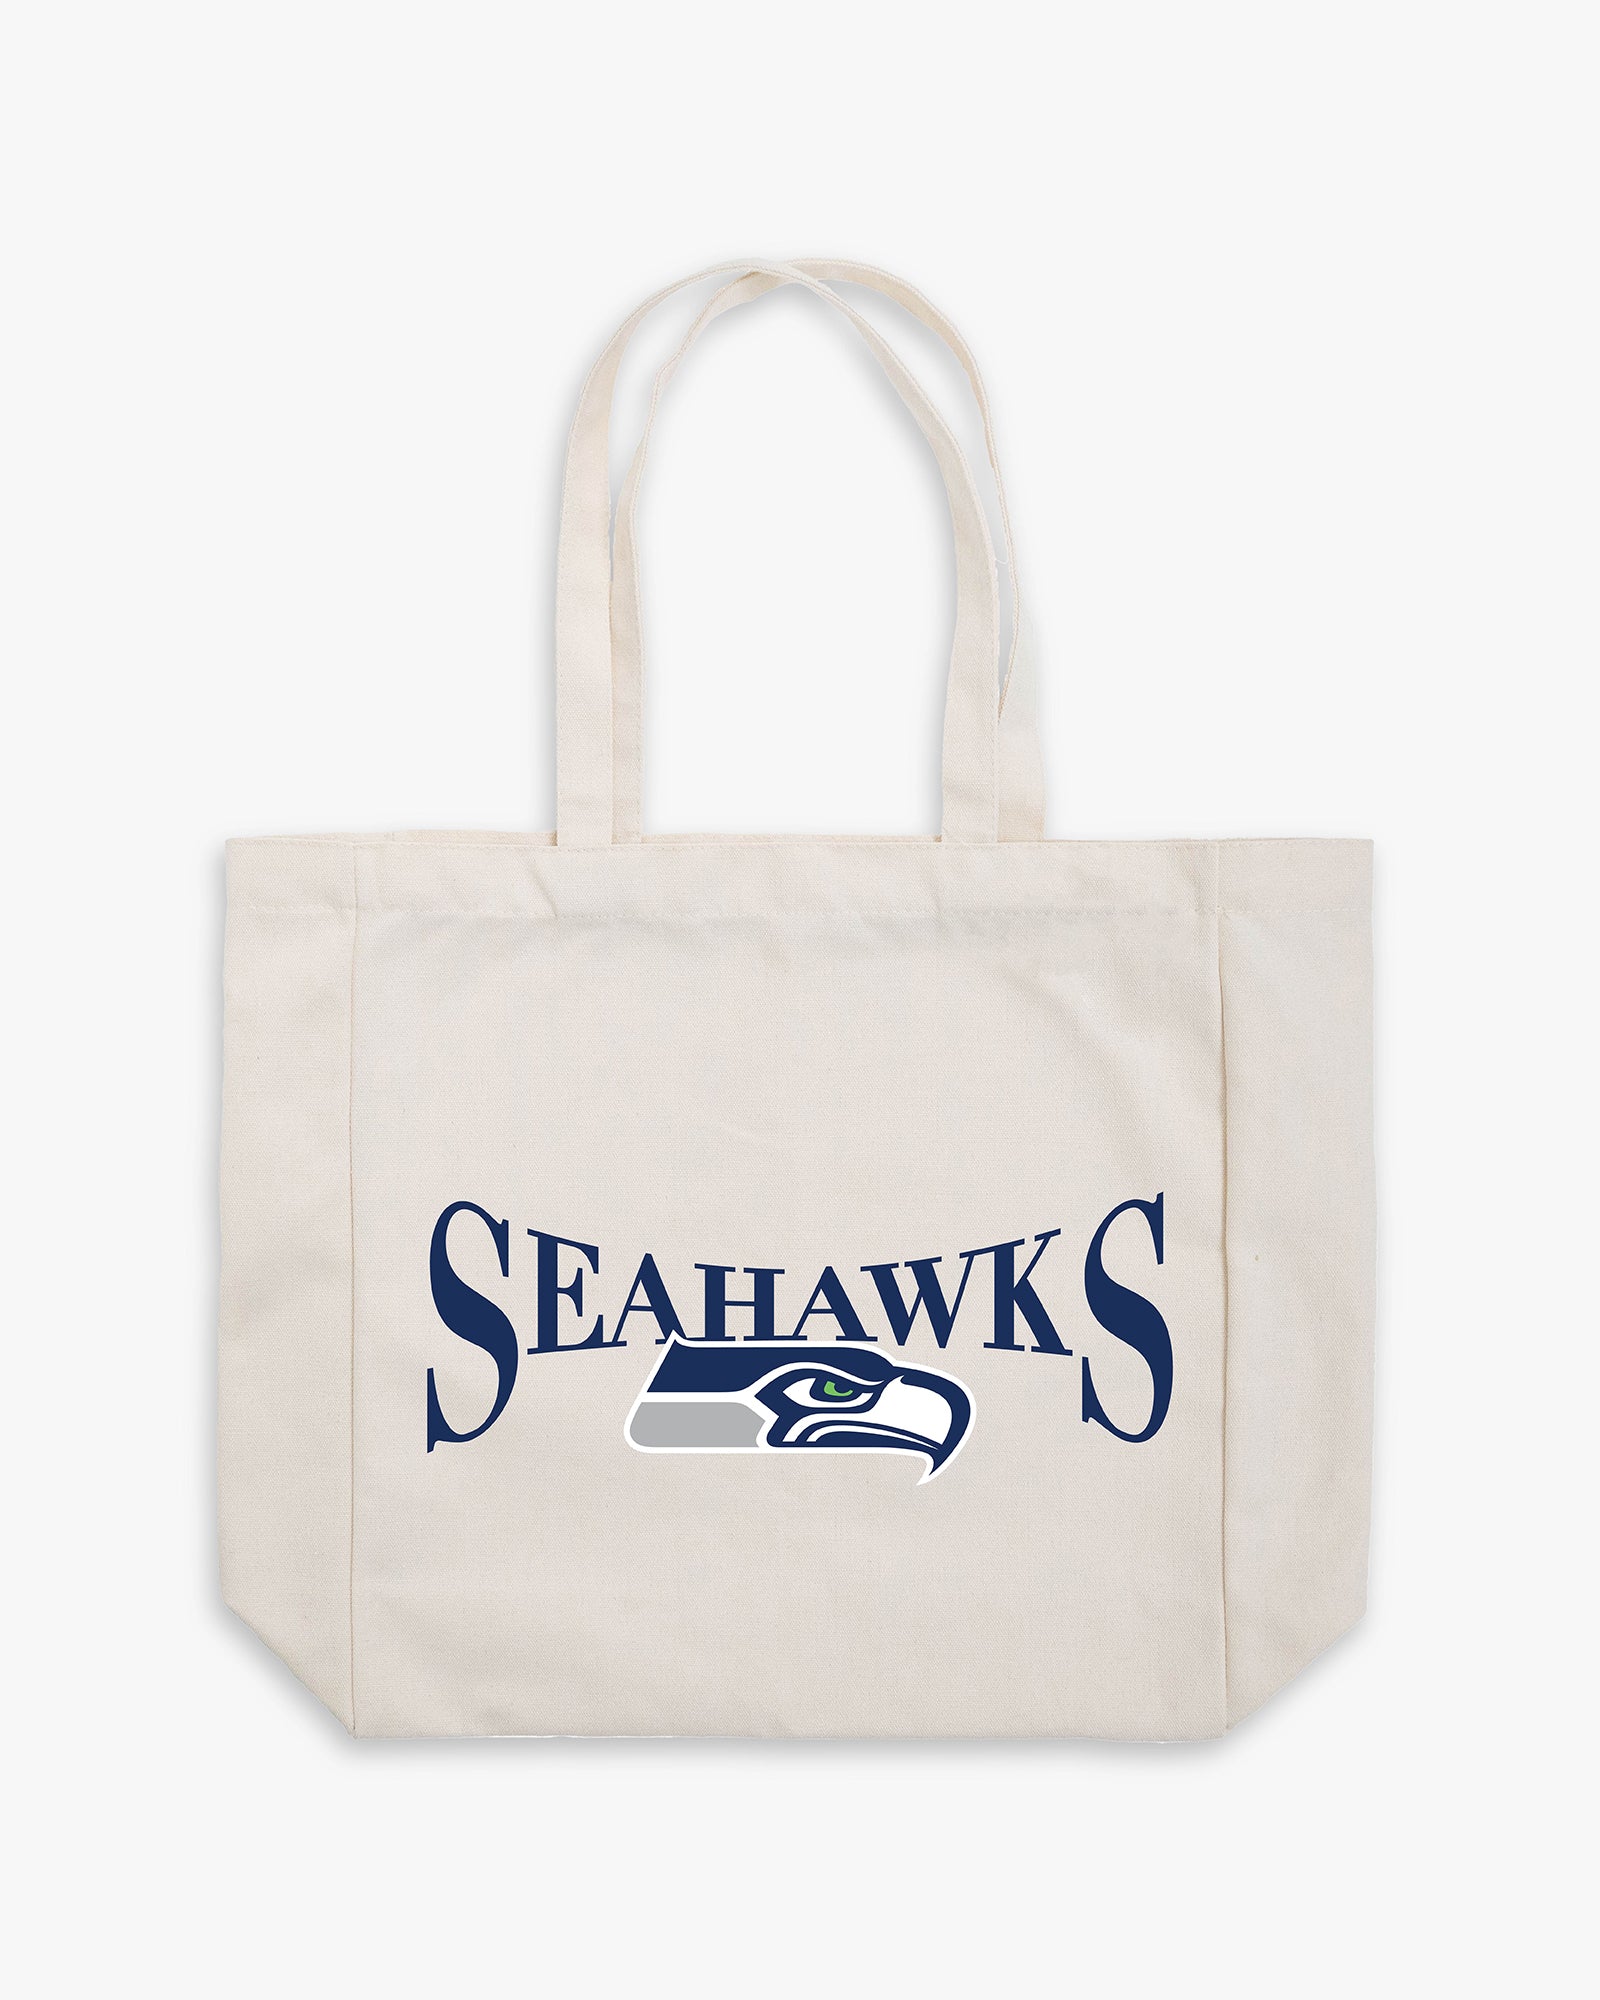 Seattle Seahawks  NFL Canvas Tote Bag